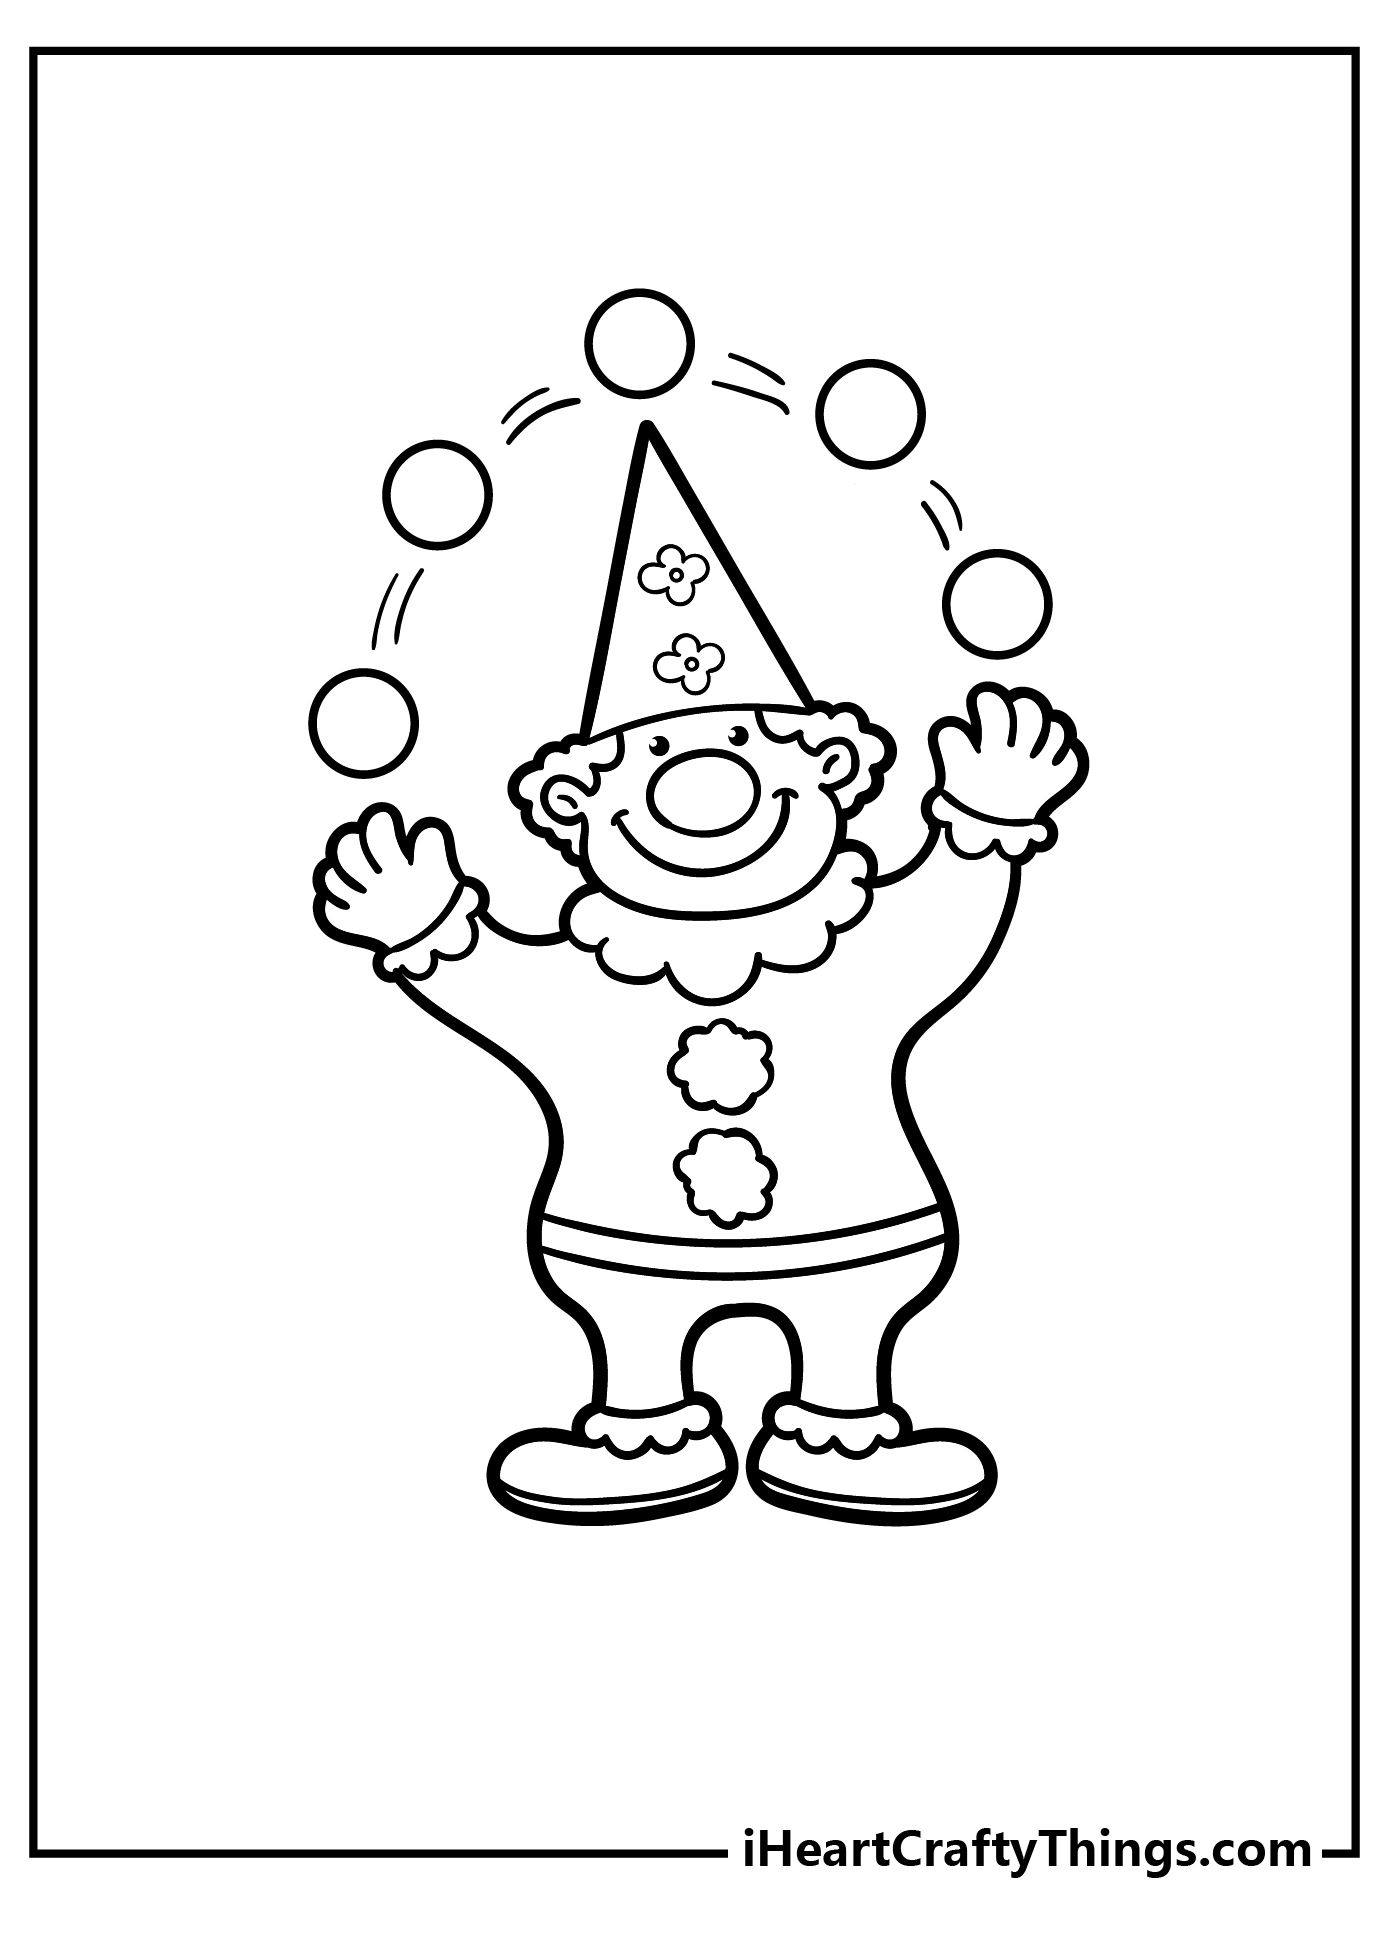 Circus Coloring Book for adults free download